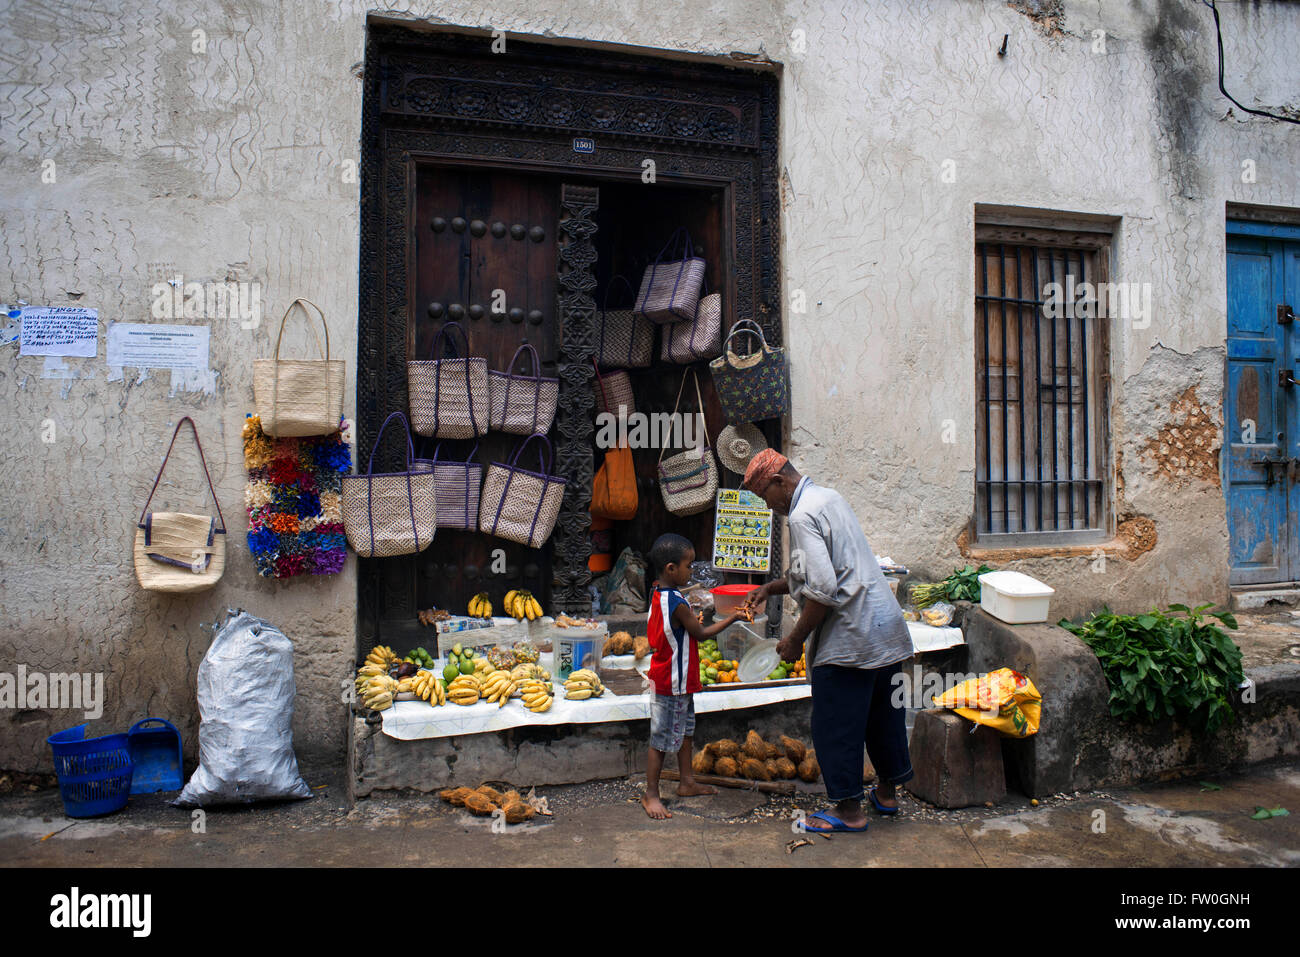 Sale of limes, bananas and different types of rice in the Stone Town central city. Stock Photo